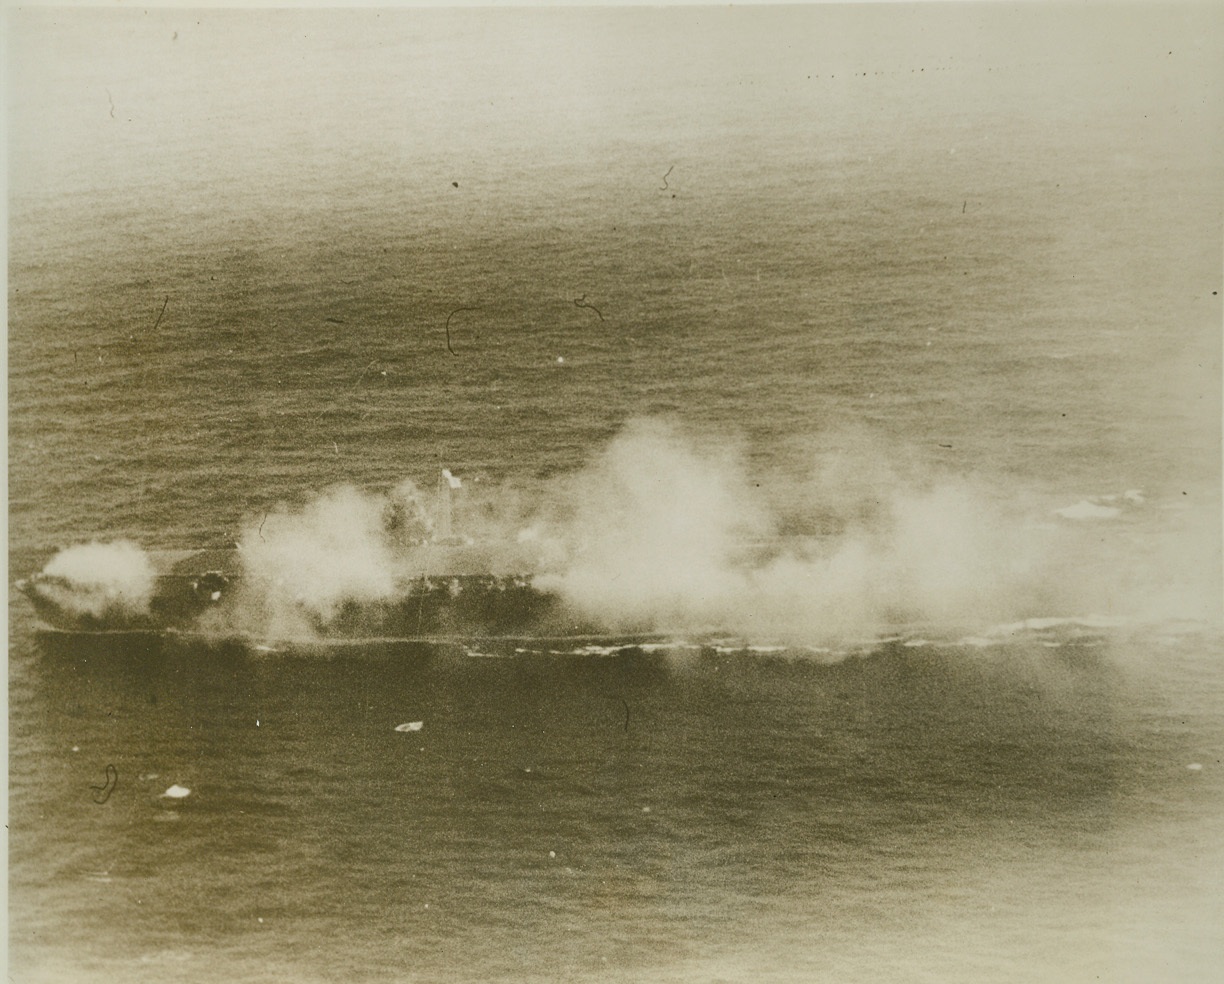 The Bitter End, 11/1/1944. Philippines—Aflame from stem to stern, this light carrier of the Jap Navy’s Chitose glass lies dead in the waters off Luzon, Philippines. The ill-fated vessel was attacked by carrier forces of the U.S. Pacific fleet. Credit: U.S.S. Navy photo from ACME.;